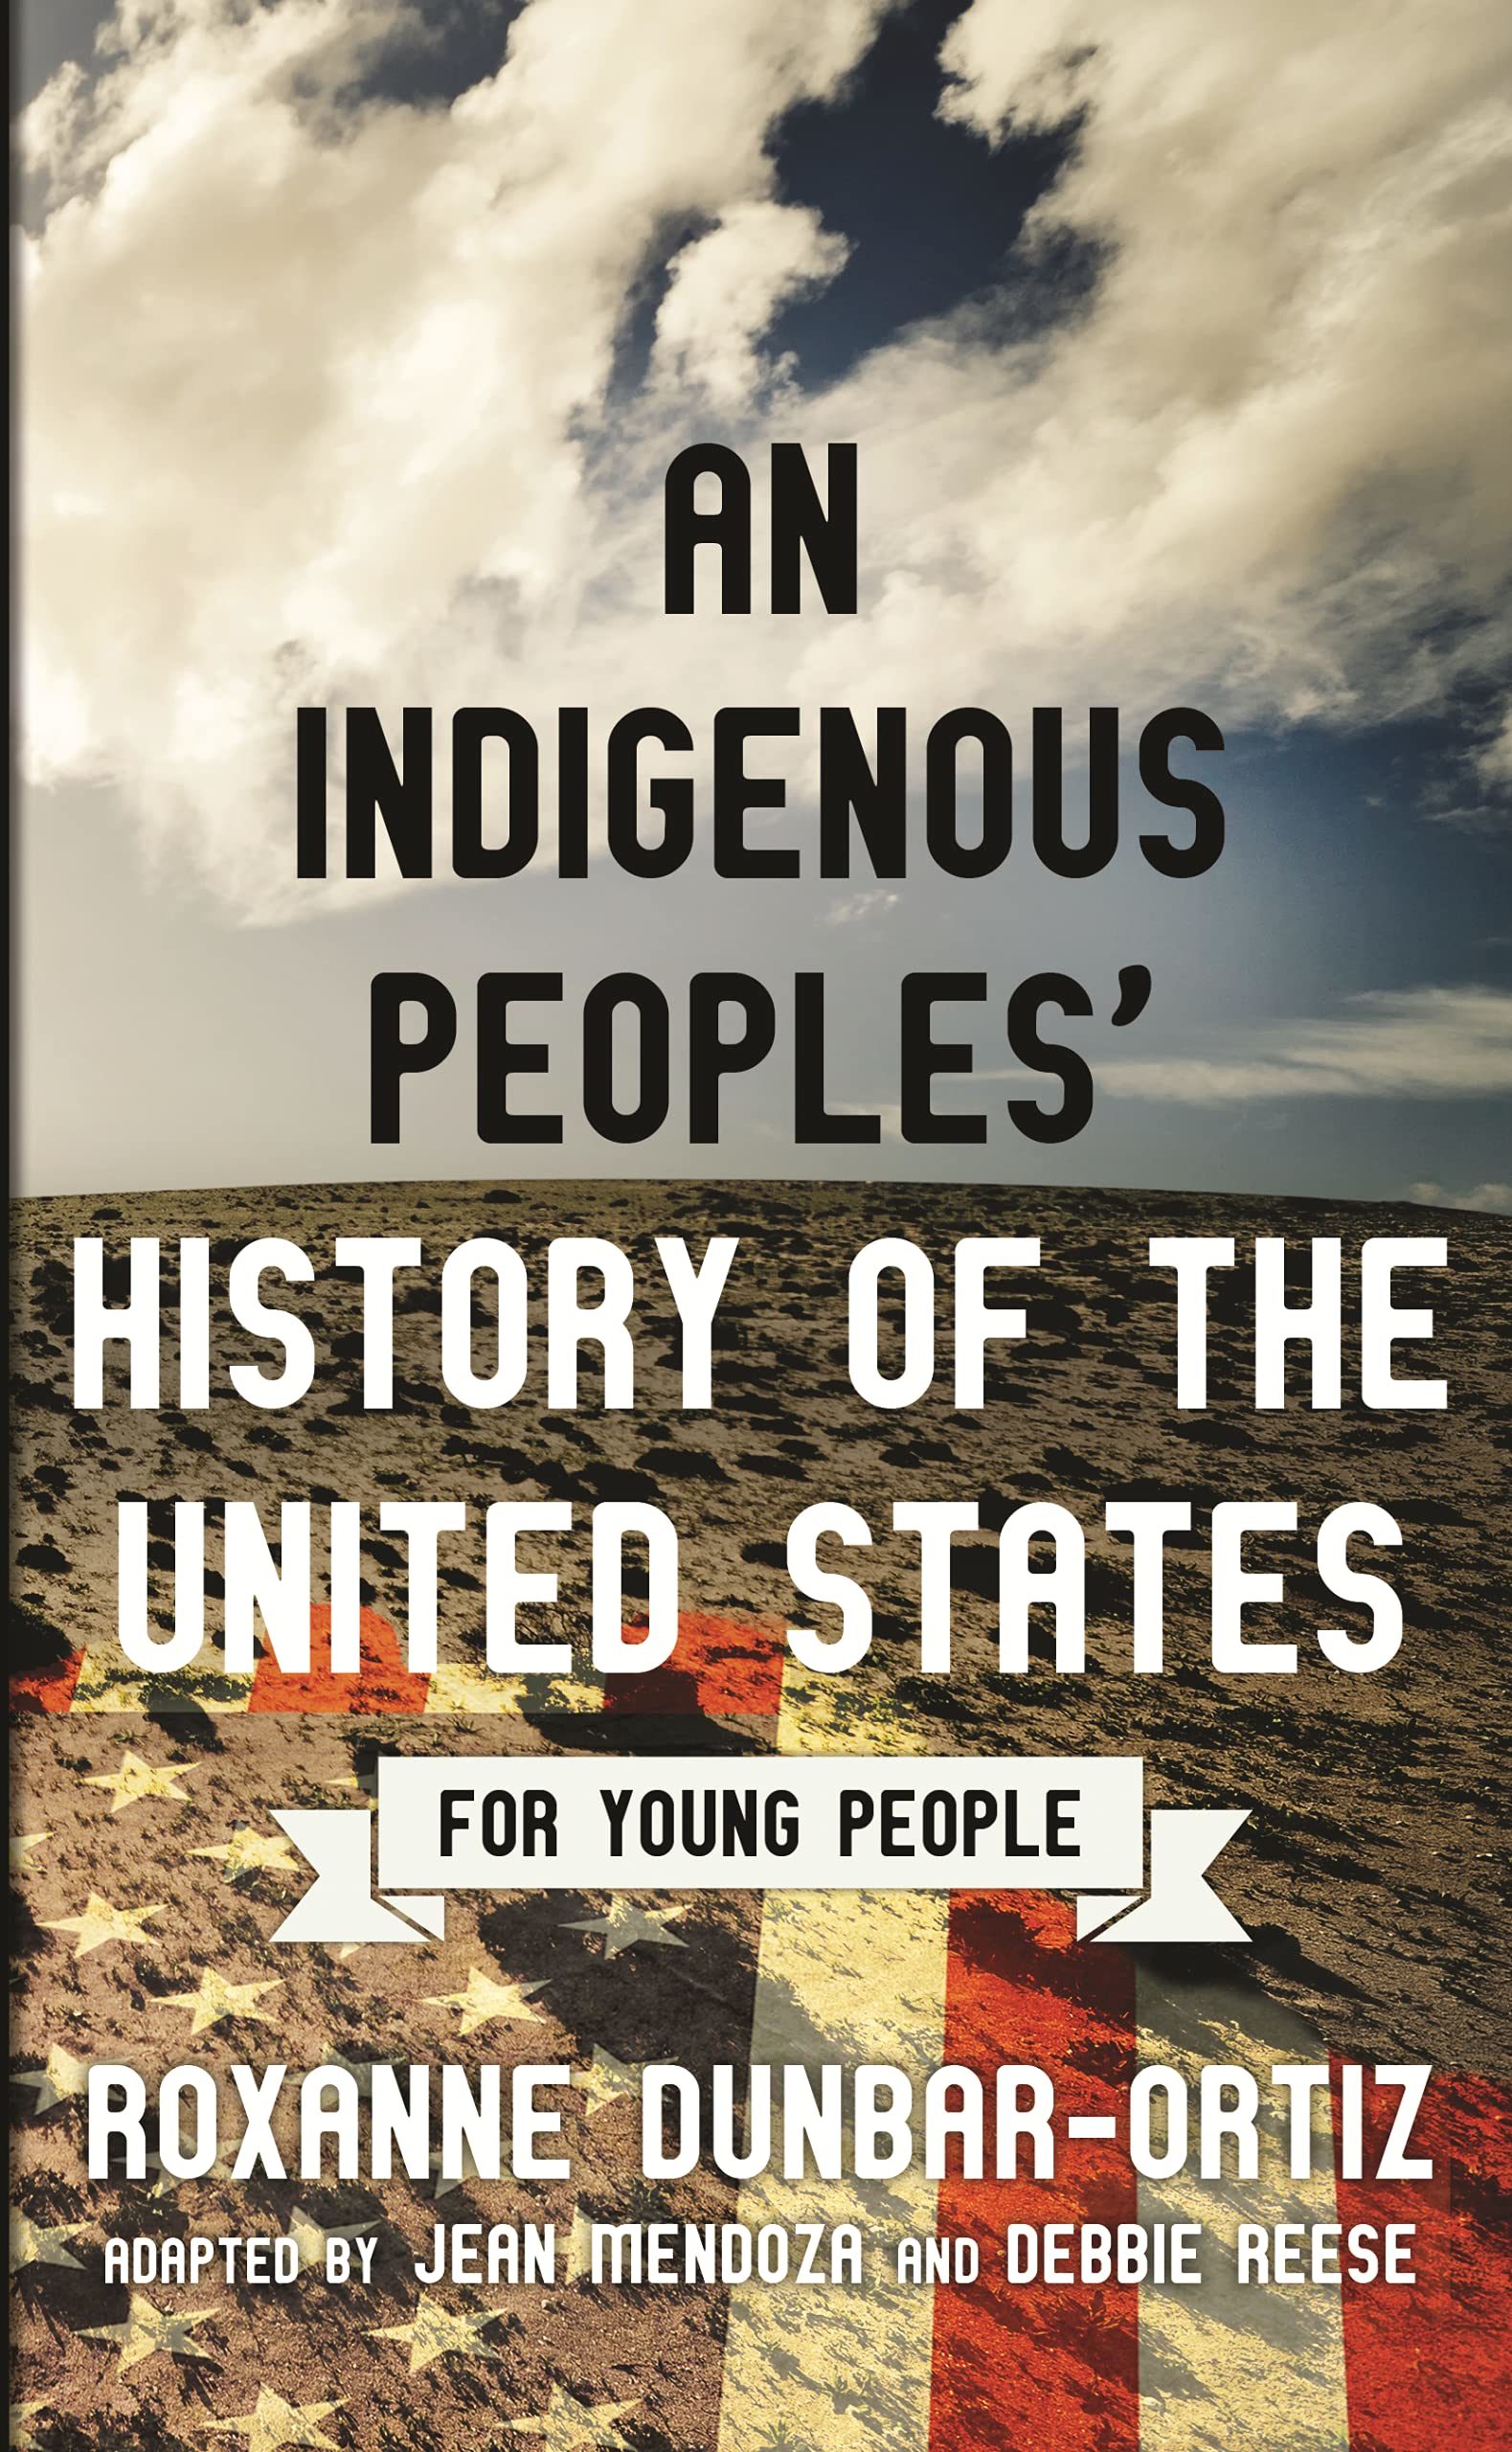 Cover of book "An Indigenous Peoples' History of the United States for Young People"